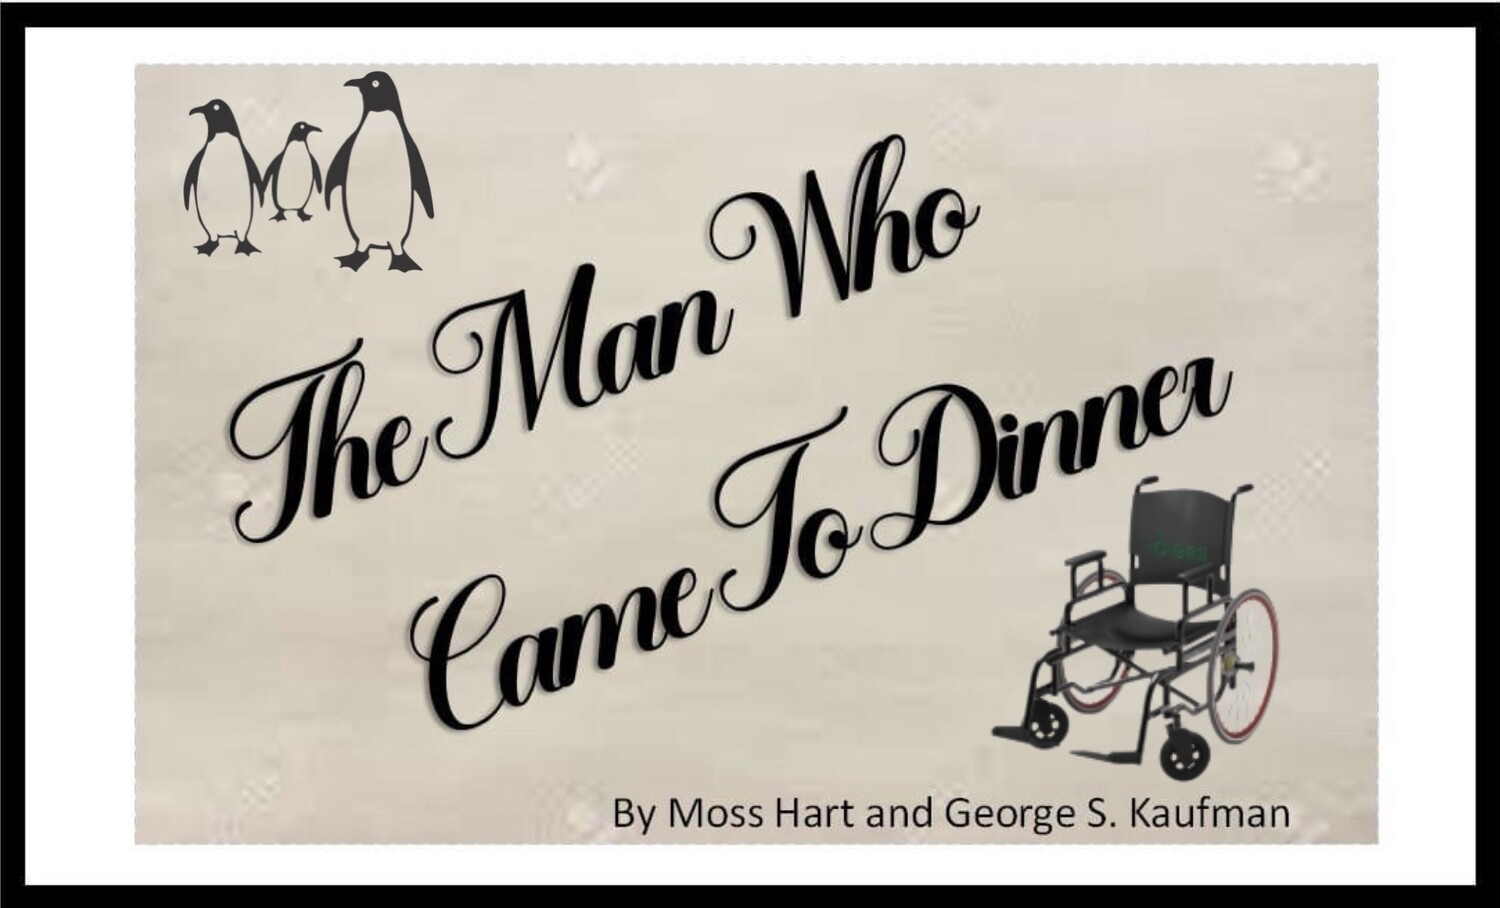 5/19/2022 7:30 PM  
Thursday Opening!  
The Man Who Came To Dinner